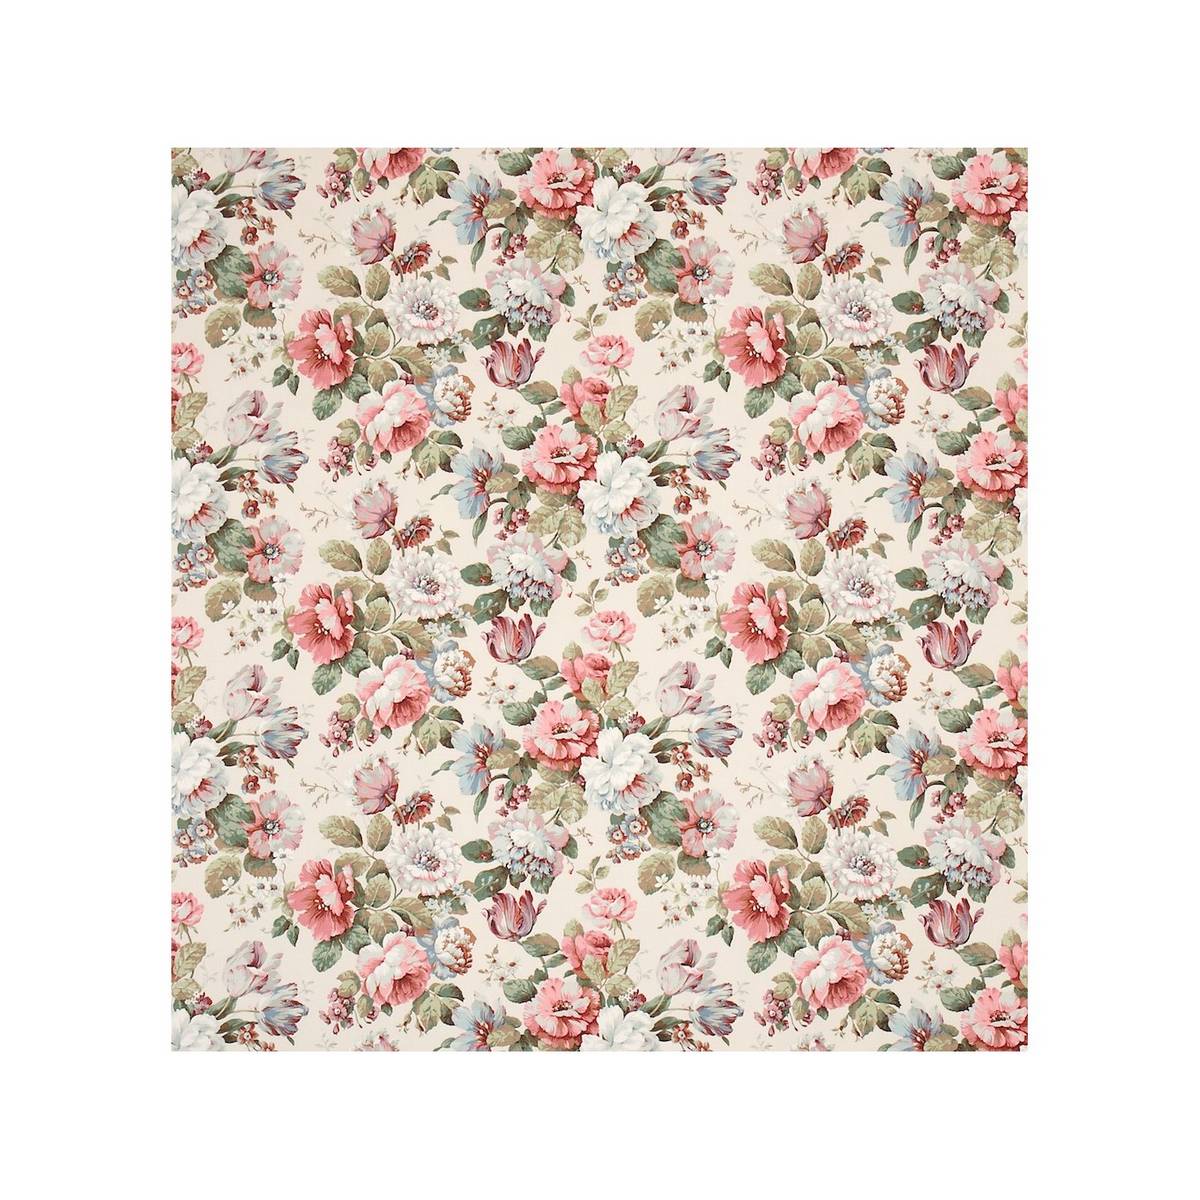 Panular Chalk/Baby Pink Fabric by Sanderson